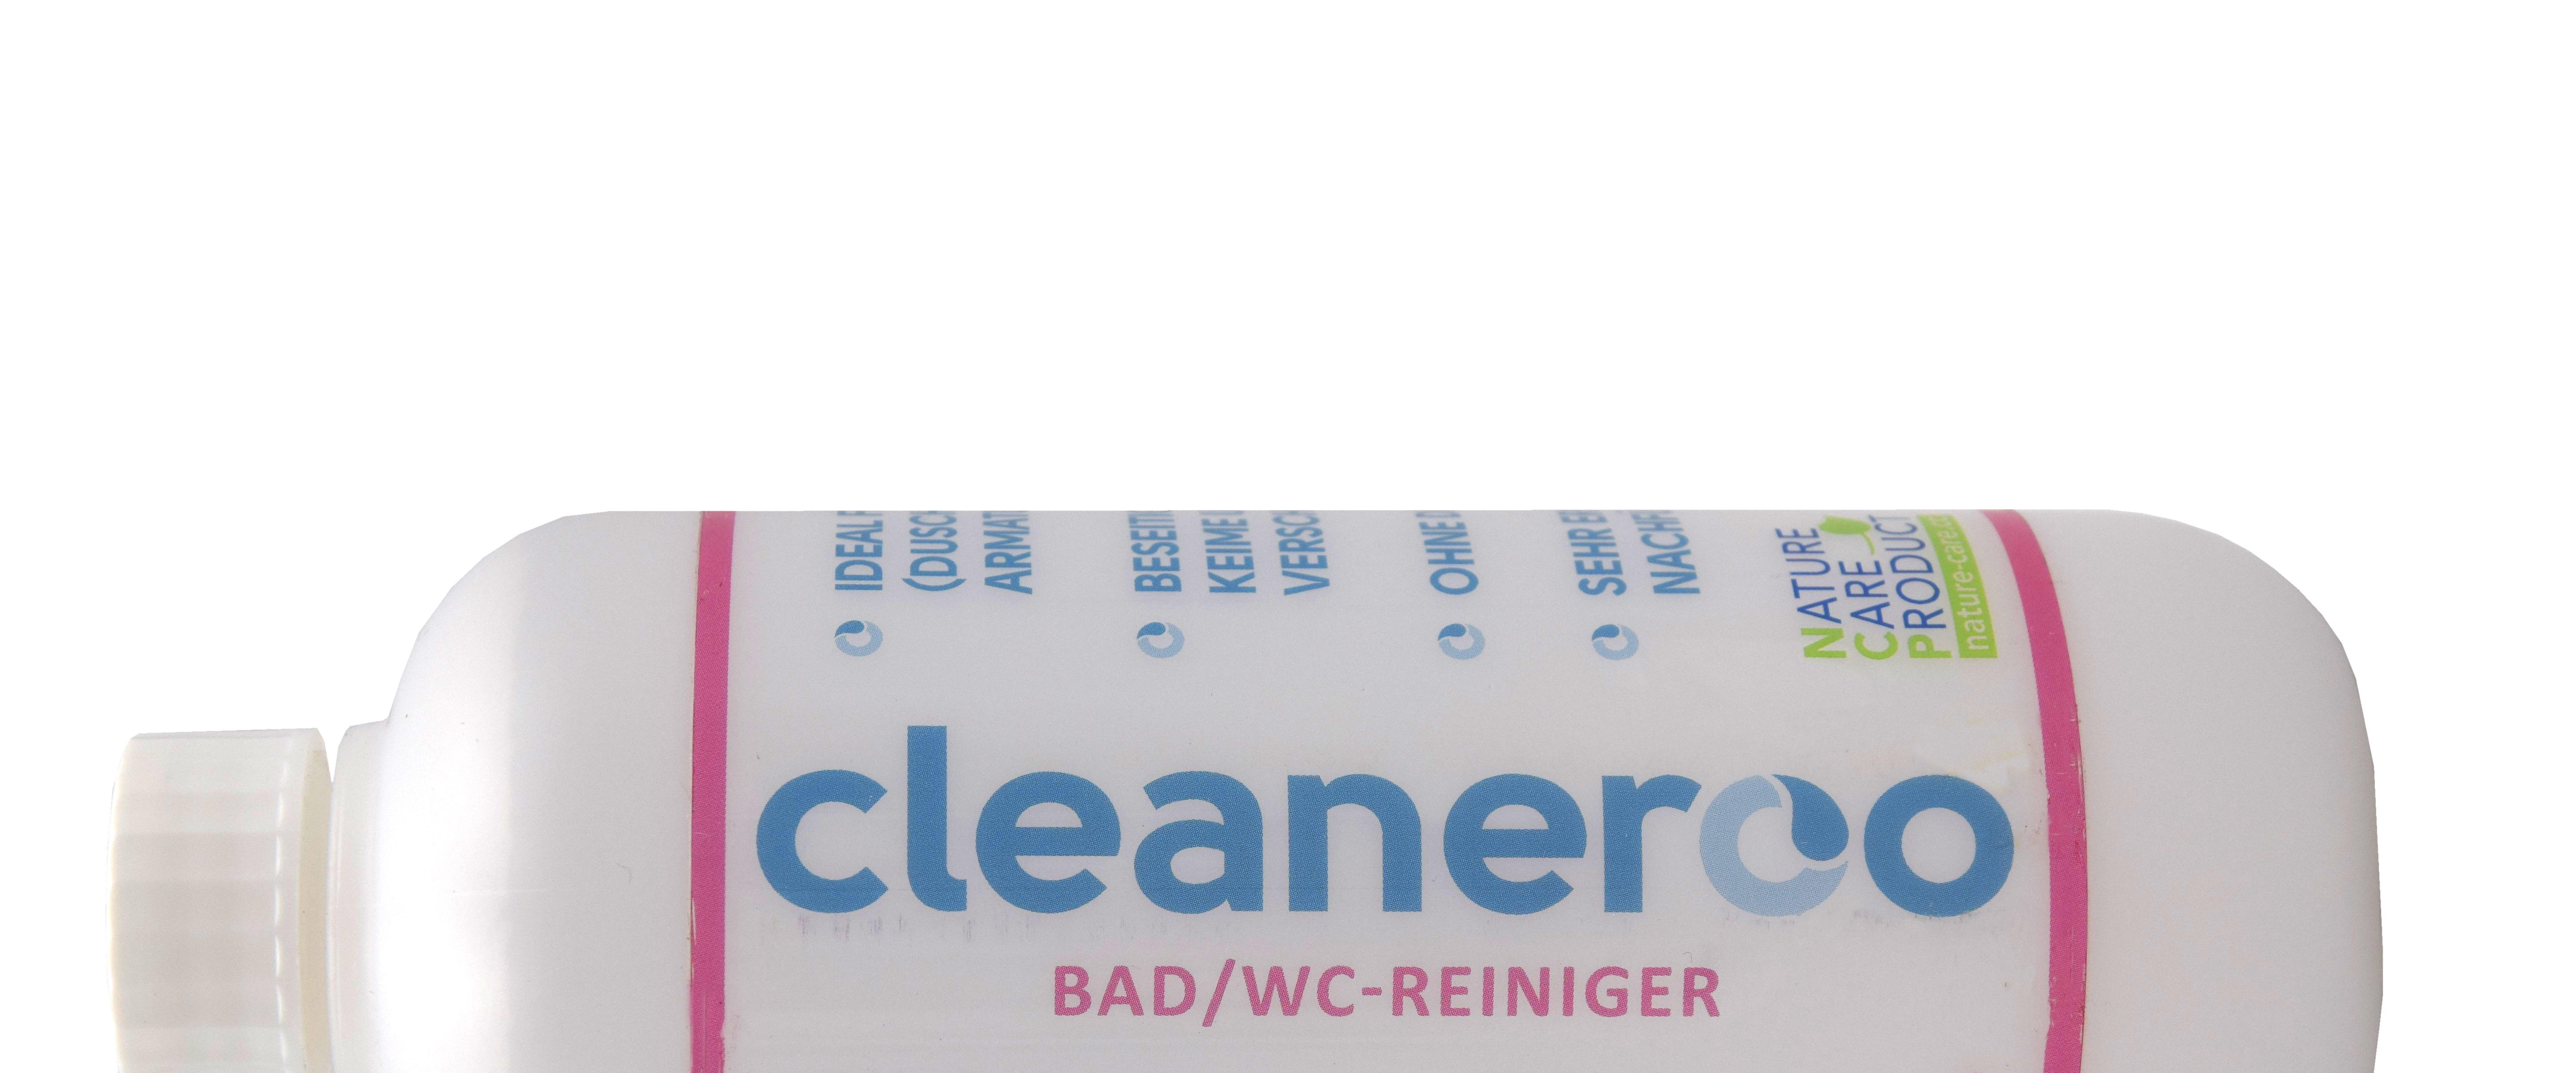 cleaneroo bathroom / WC cleaner (red)